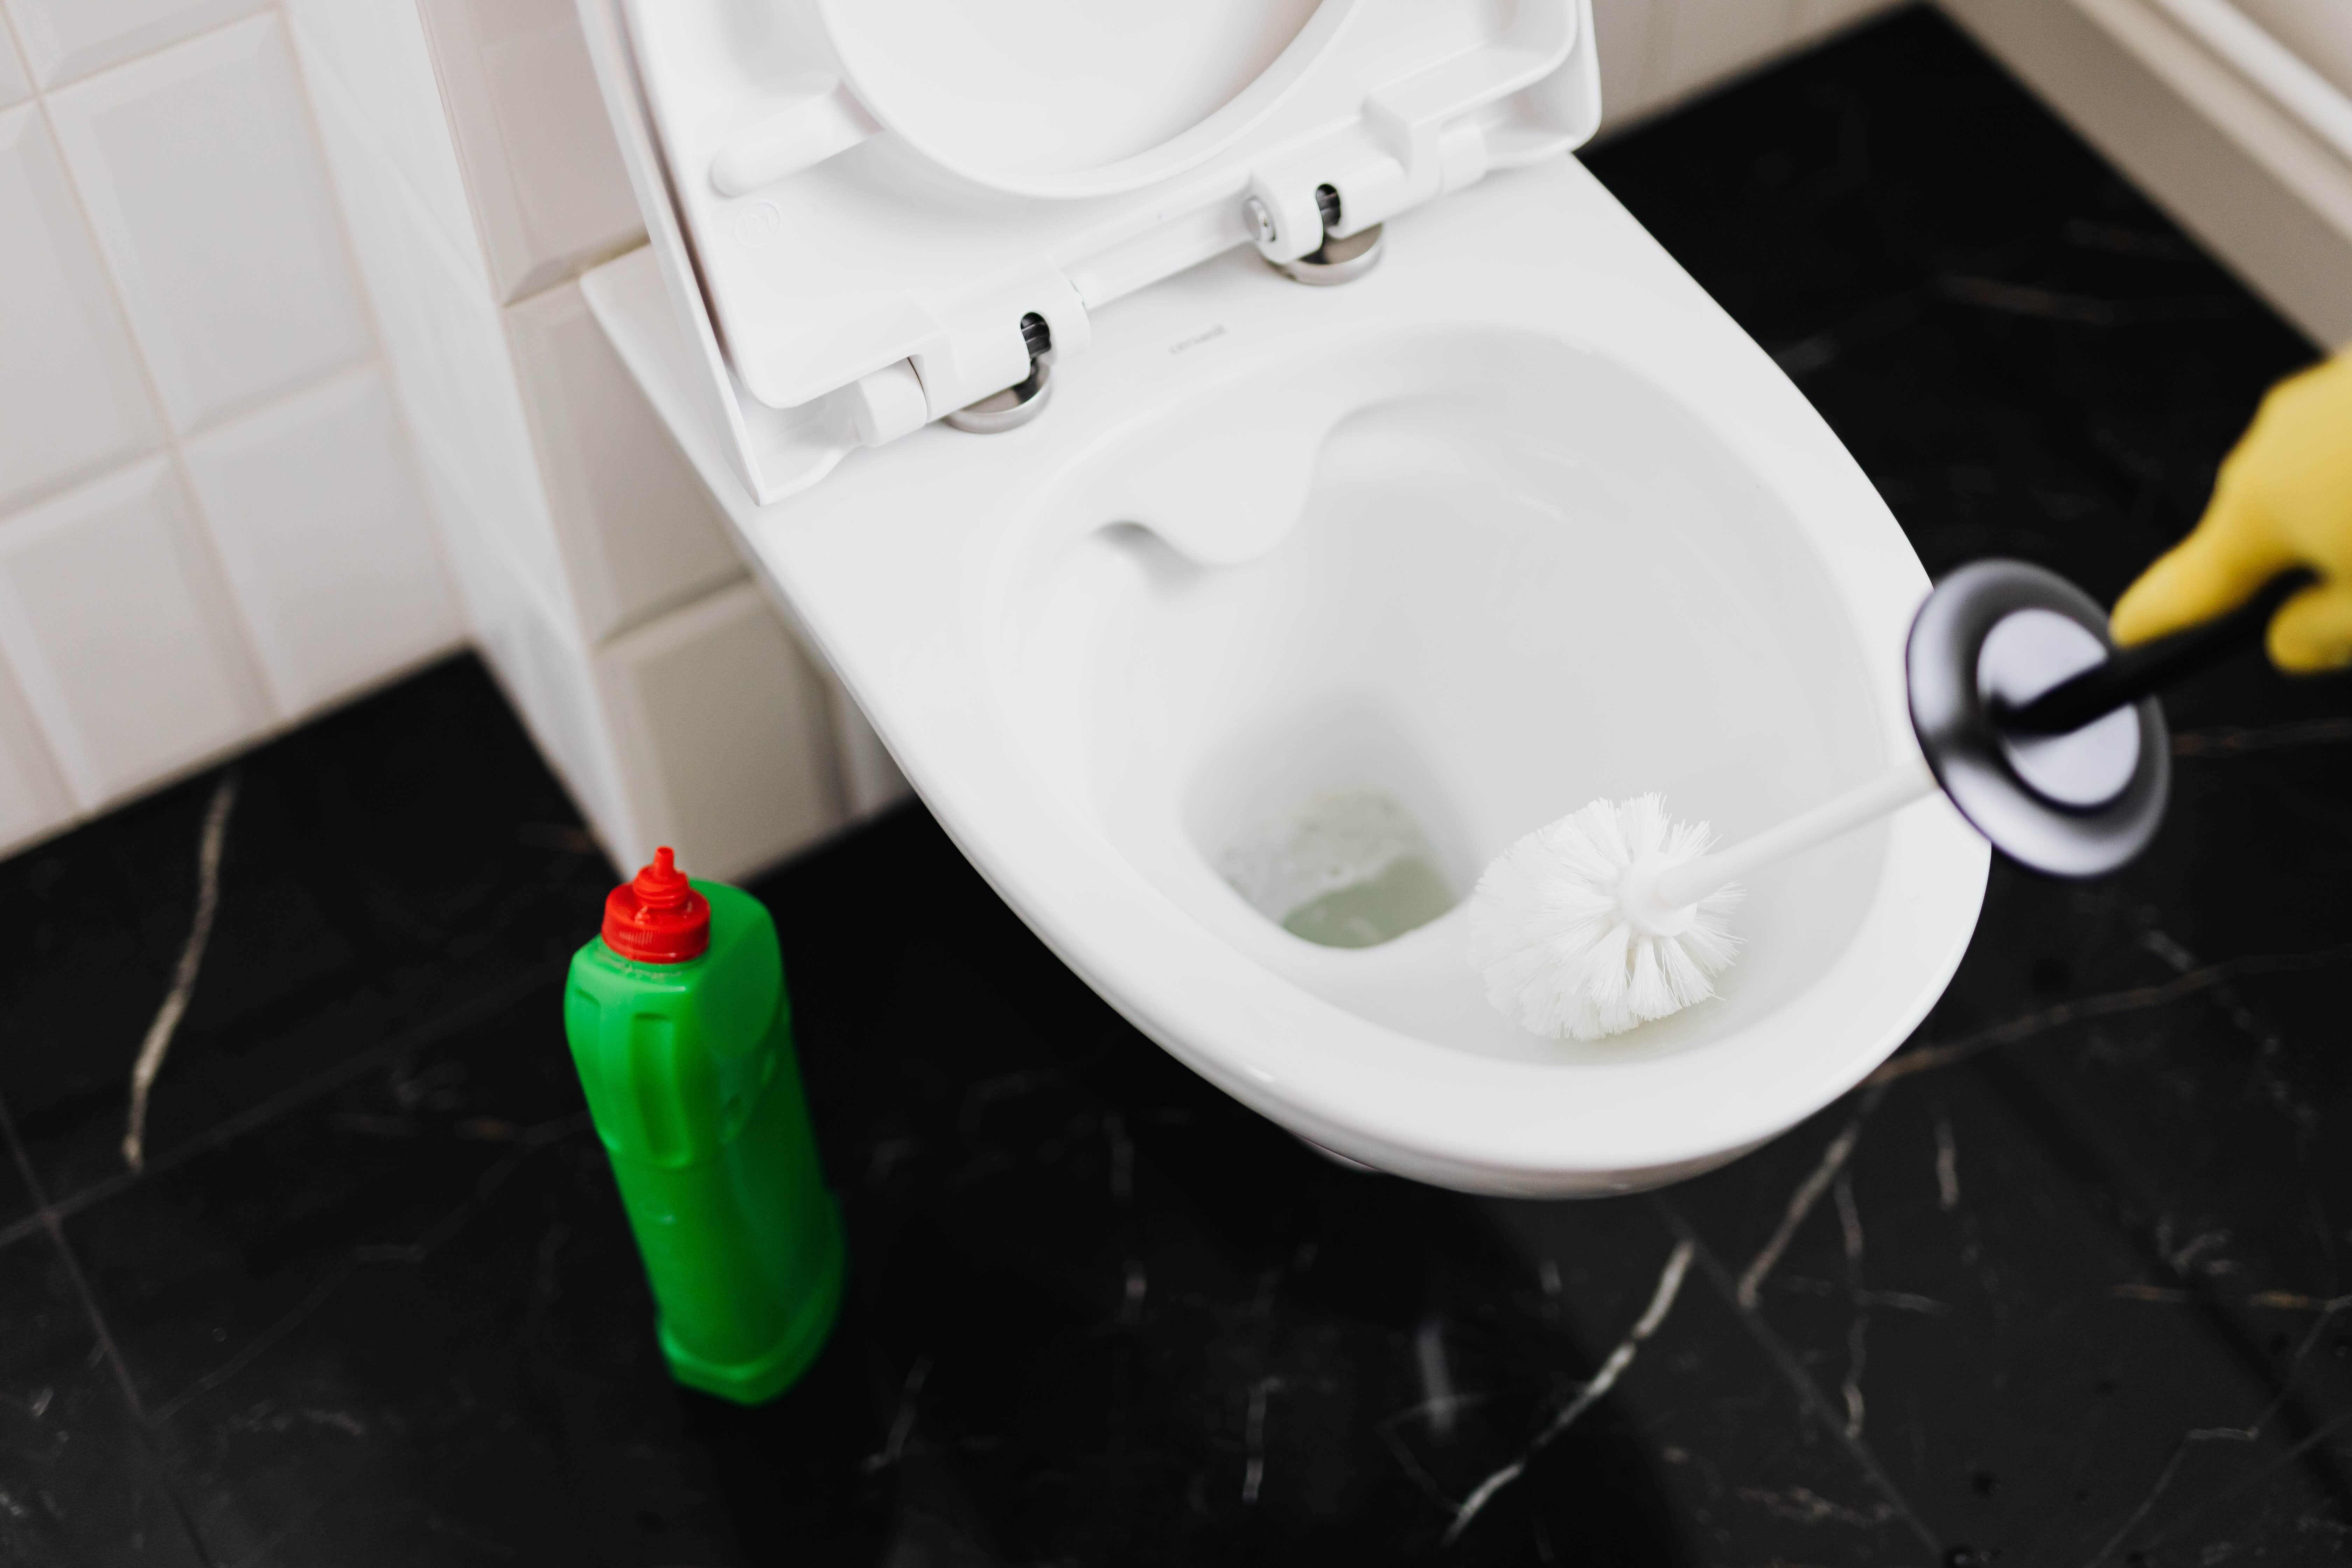 cleaning of a toilet before move out cleaning service